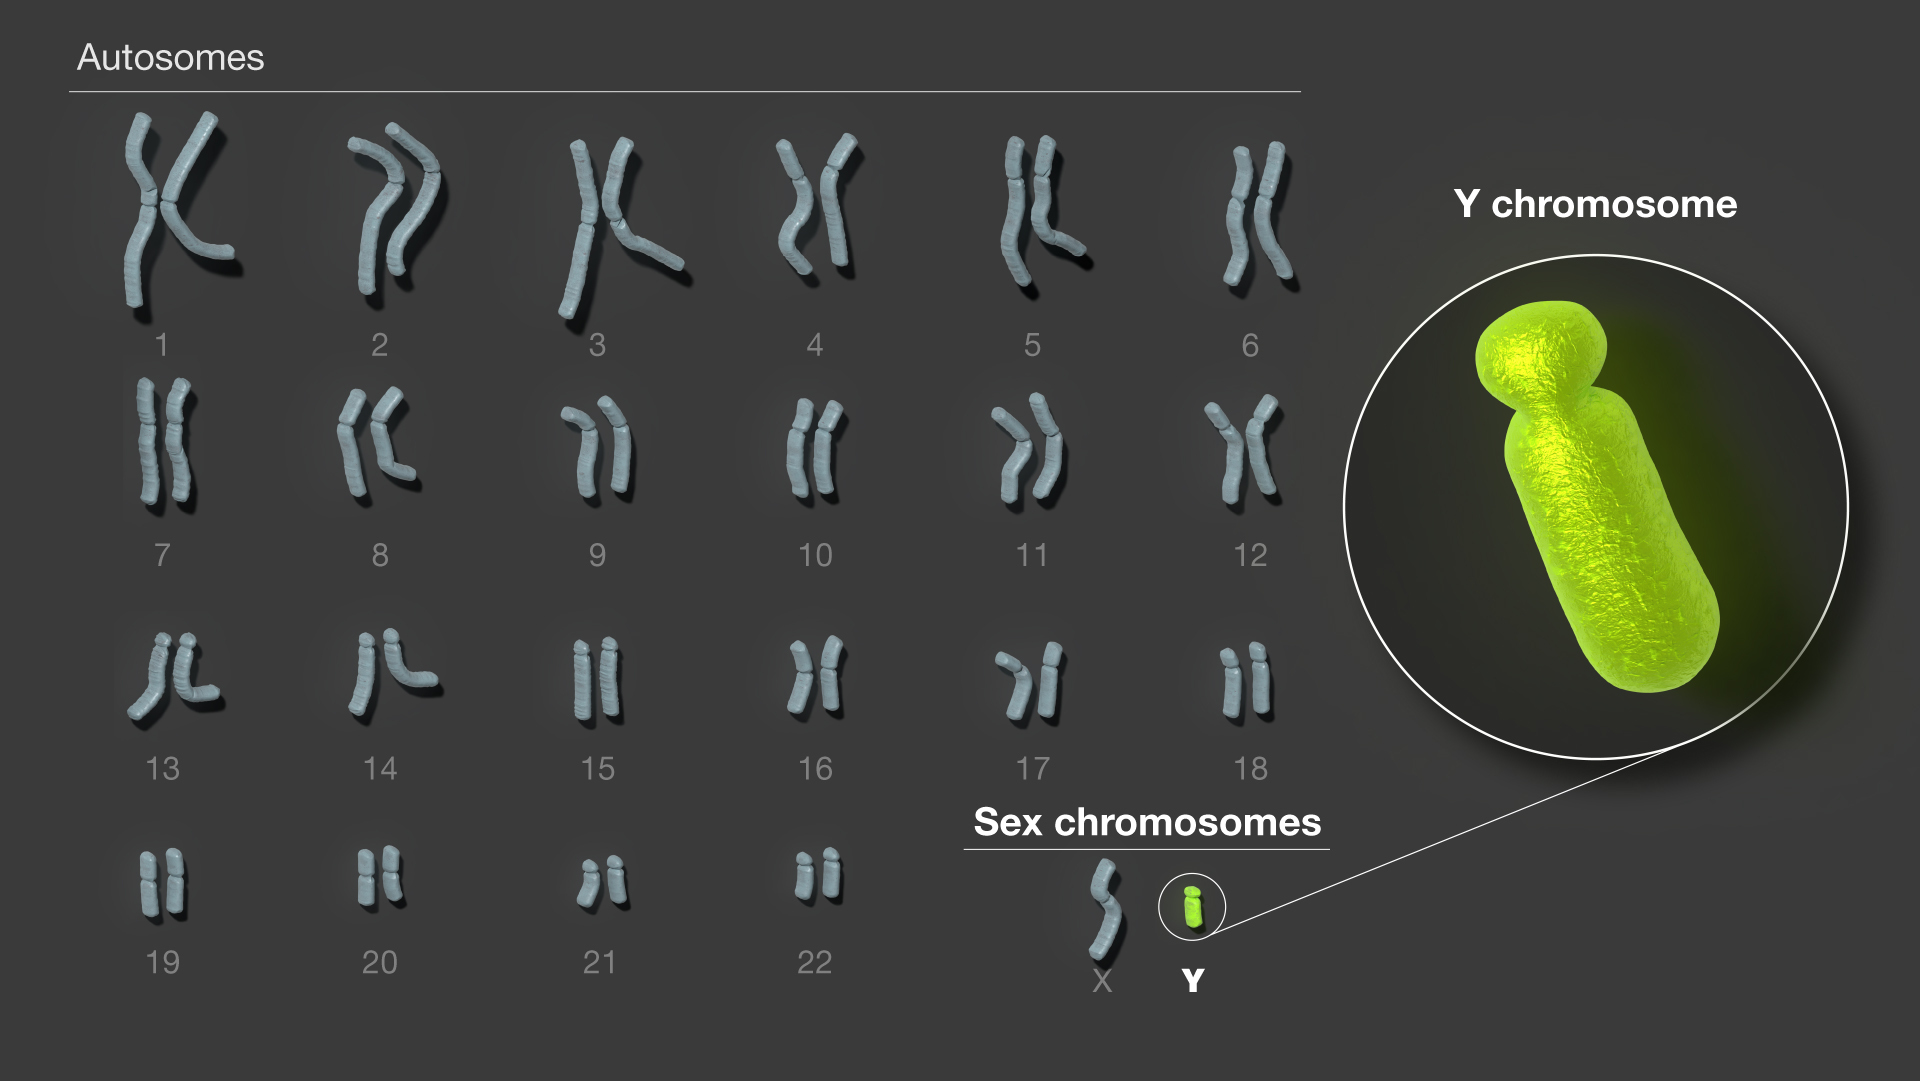 rendering of 23 chromosomes, with the last two in the bottom right corner labeled sex chromosomes. the x sex chromosome is longer than the y sex chromosome. the y chromosome is highlighted green and enlarged to the side for emphasis